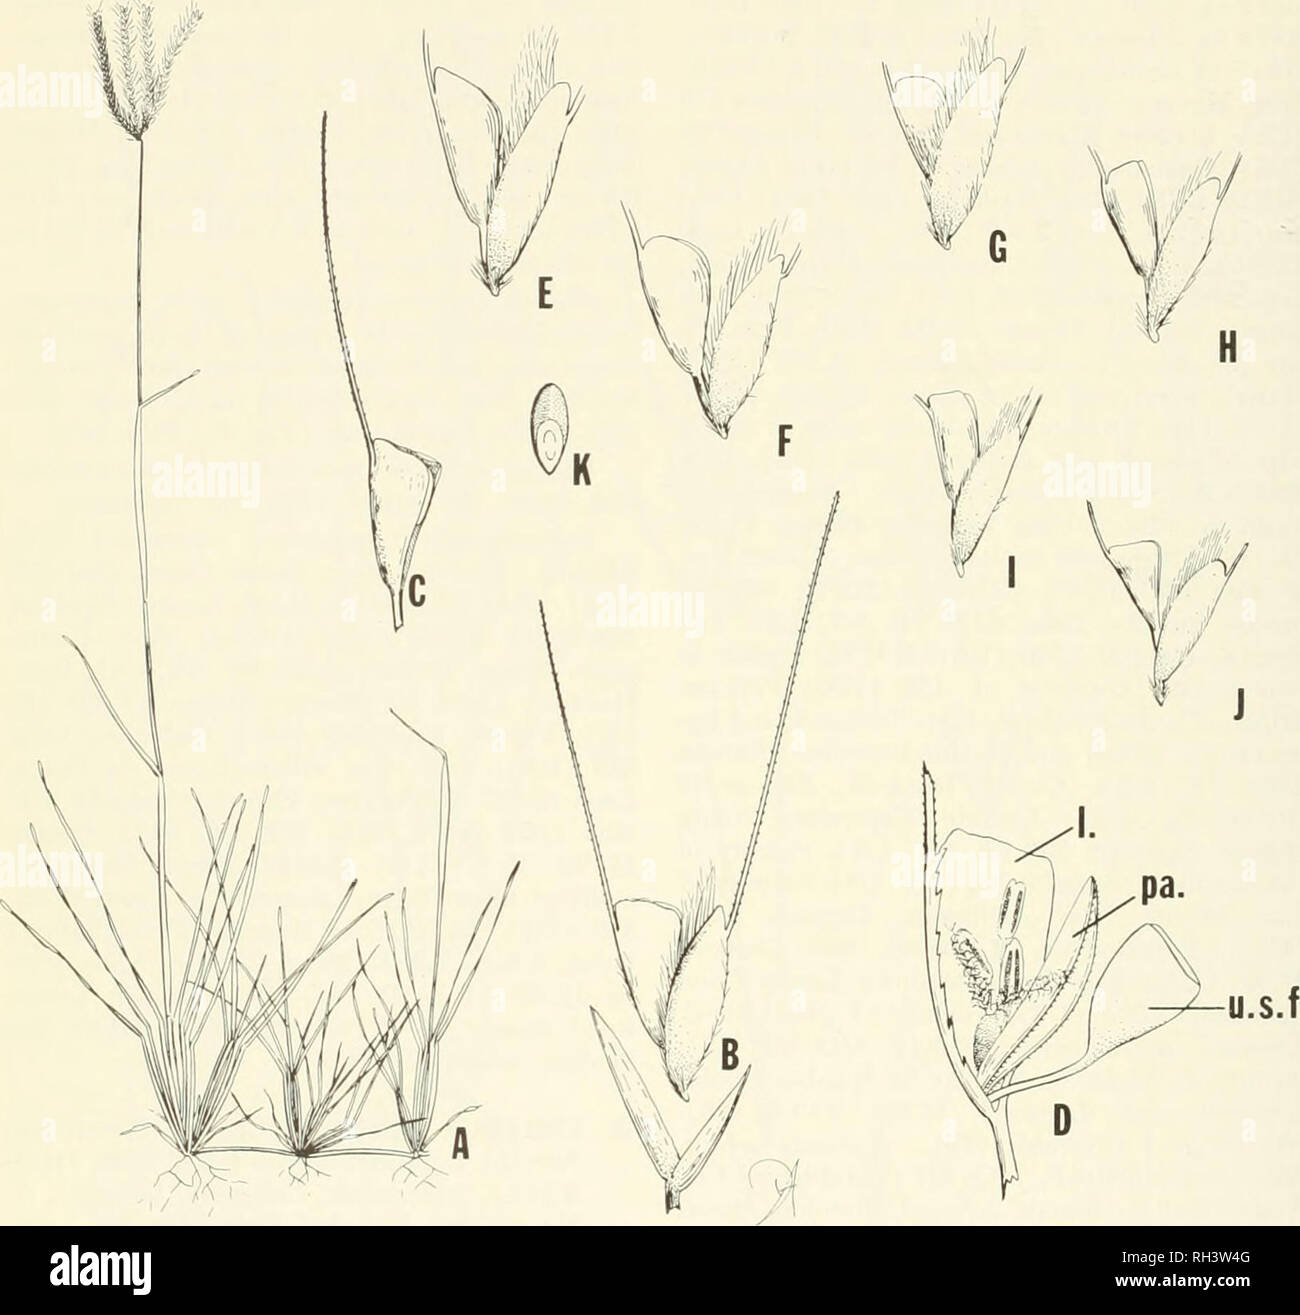 . Brigham Young University science bulletin. Biology -- Periodicals. 124 Brigham Young University Science Bulletin. Fig. 82. ChloTis mossambicensis. (A) habit, x 1/5; (B) spikelet, partly dissected, x 5; (C) sterile florets, x 7.5; (D) partly dissected &quot;sterile&quot; florets, showing upper sterile floret (u.s.f.), palea of lower &quot;sterile&quot; floret (pa.), lemma of lower &quot;sterile&quot; floret (1.), and flower, x 20; (E-J) florets, showing variation, x 5; (K) caryopsis, x 7.5. nerve; first glume 1.6 to 2.6 mm long, ca 0.2 mm wide; second glume 3.0 to 4.4 mm long, 0.3 to 0.4 mm w Stock Photo